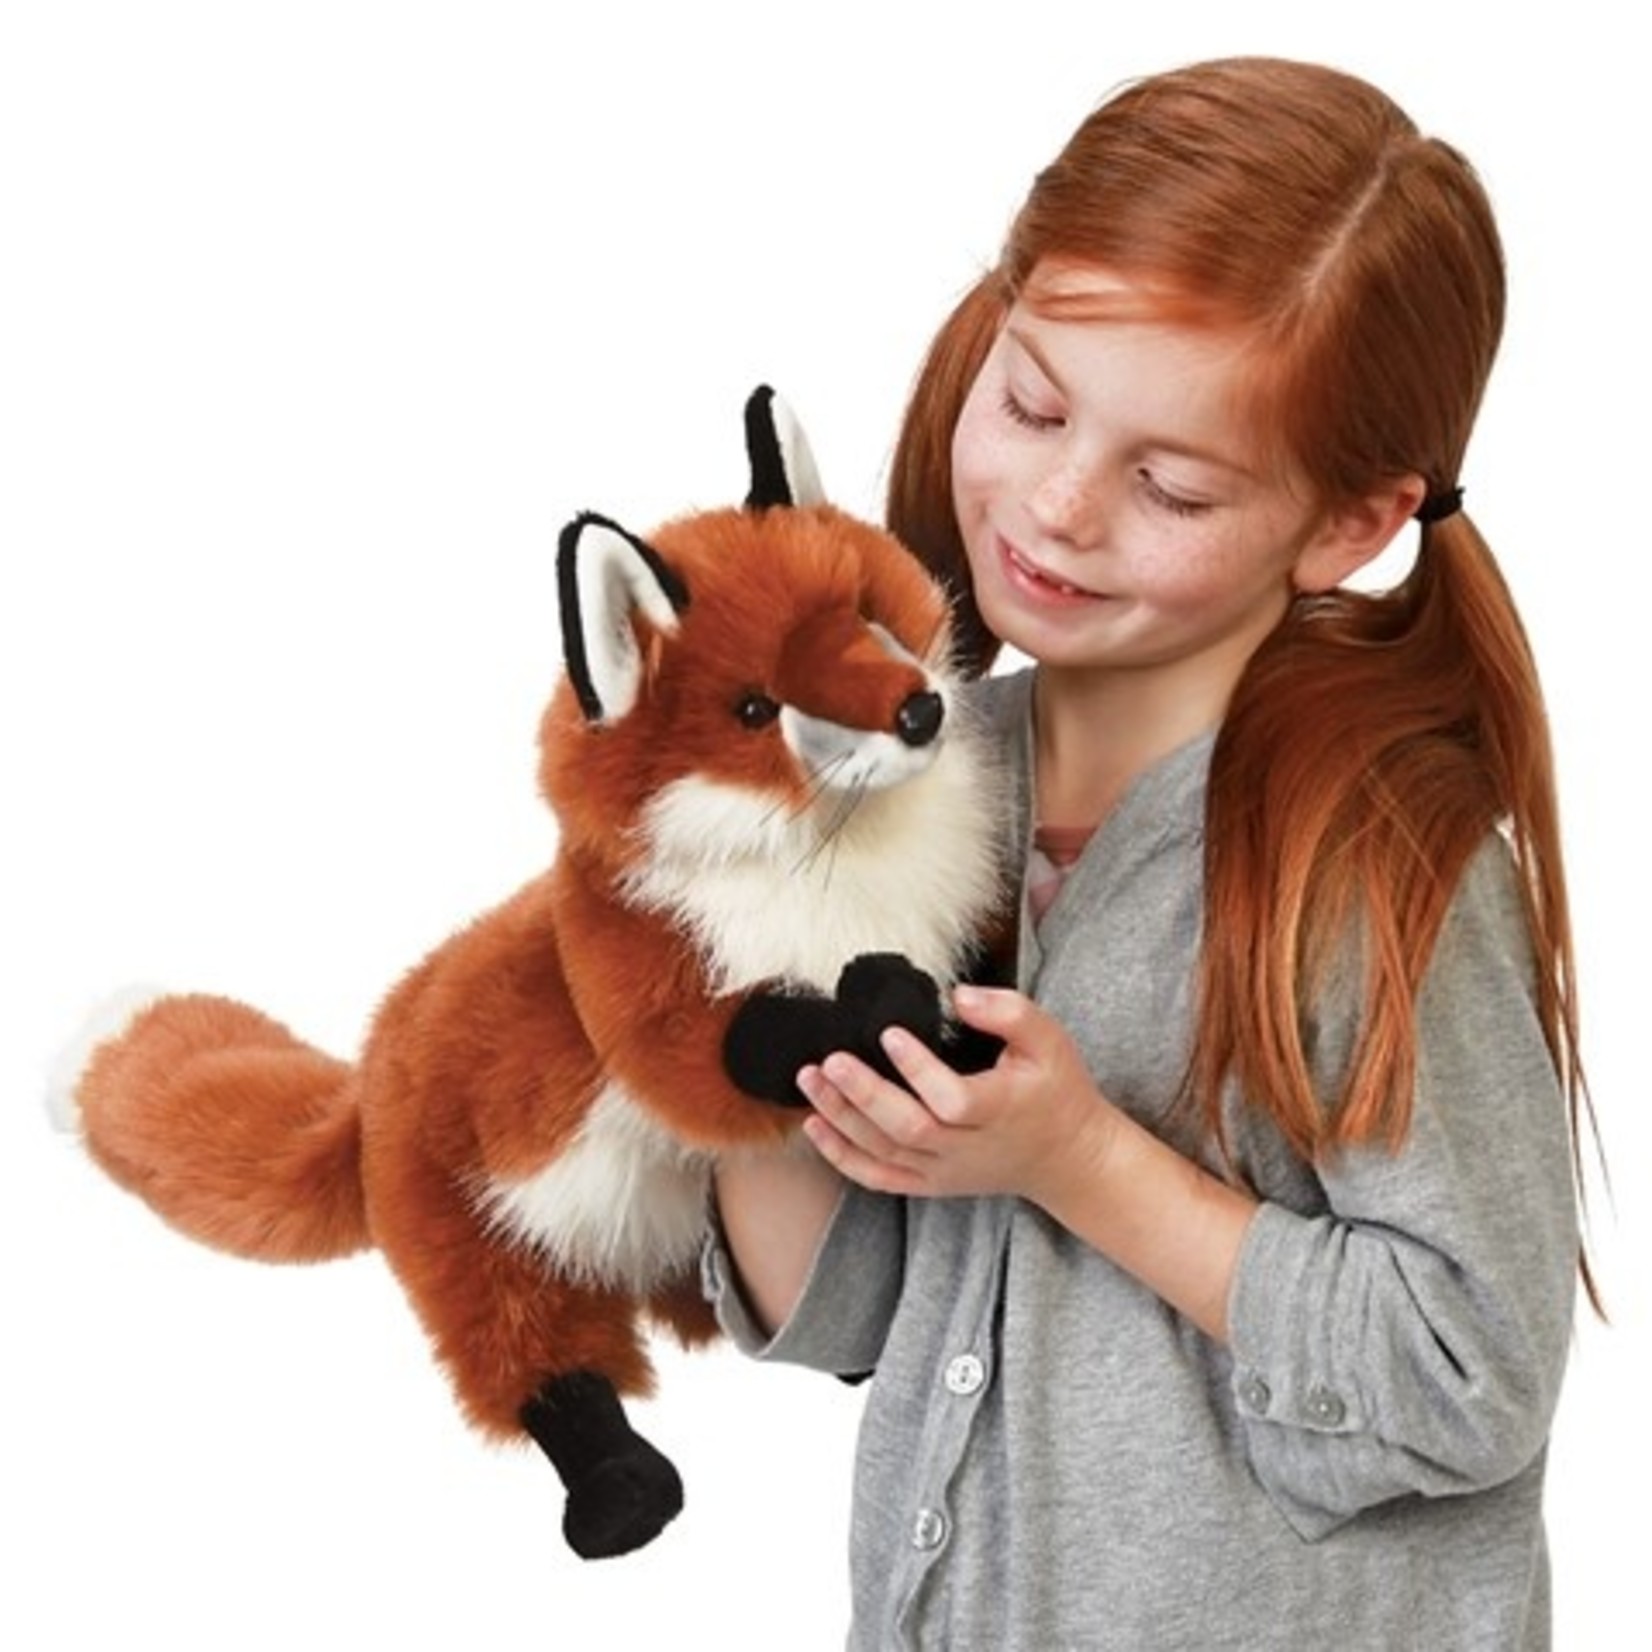 Folkmanis Puppets Hand Puppet - Red Fox